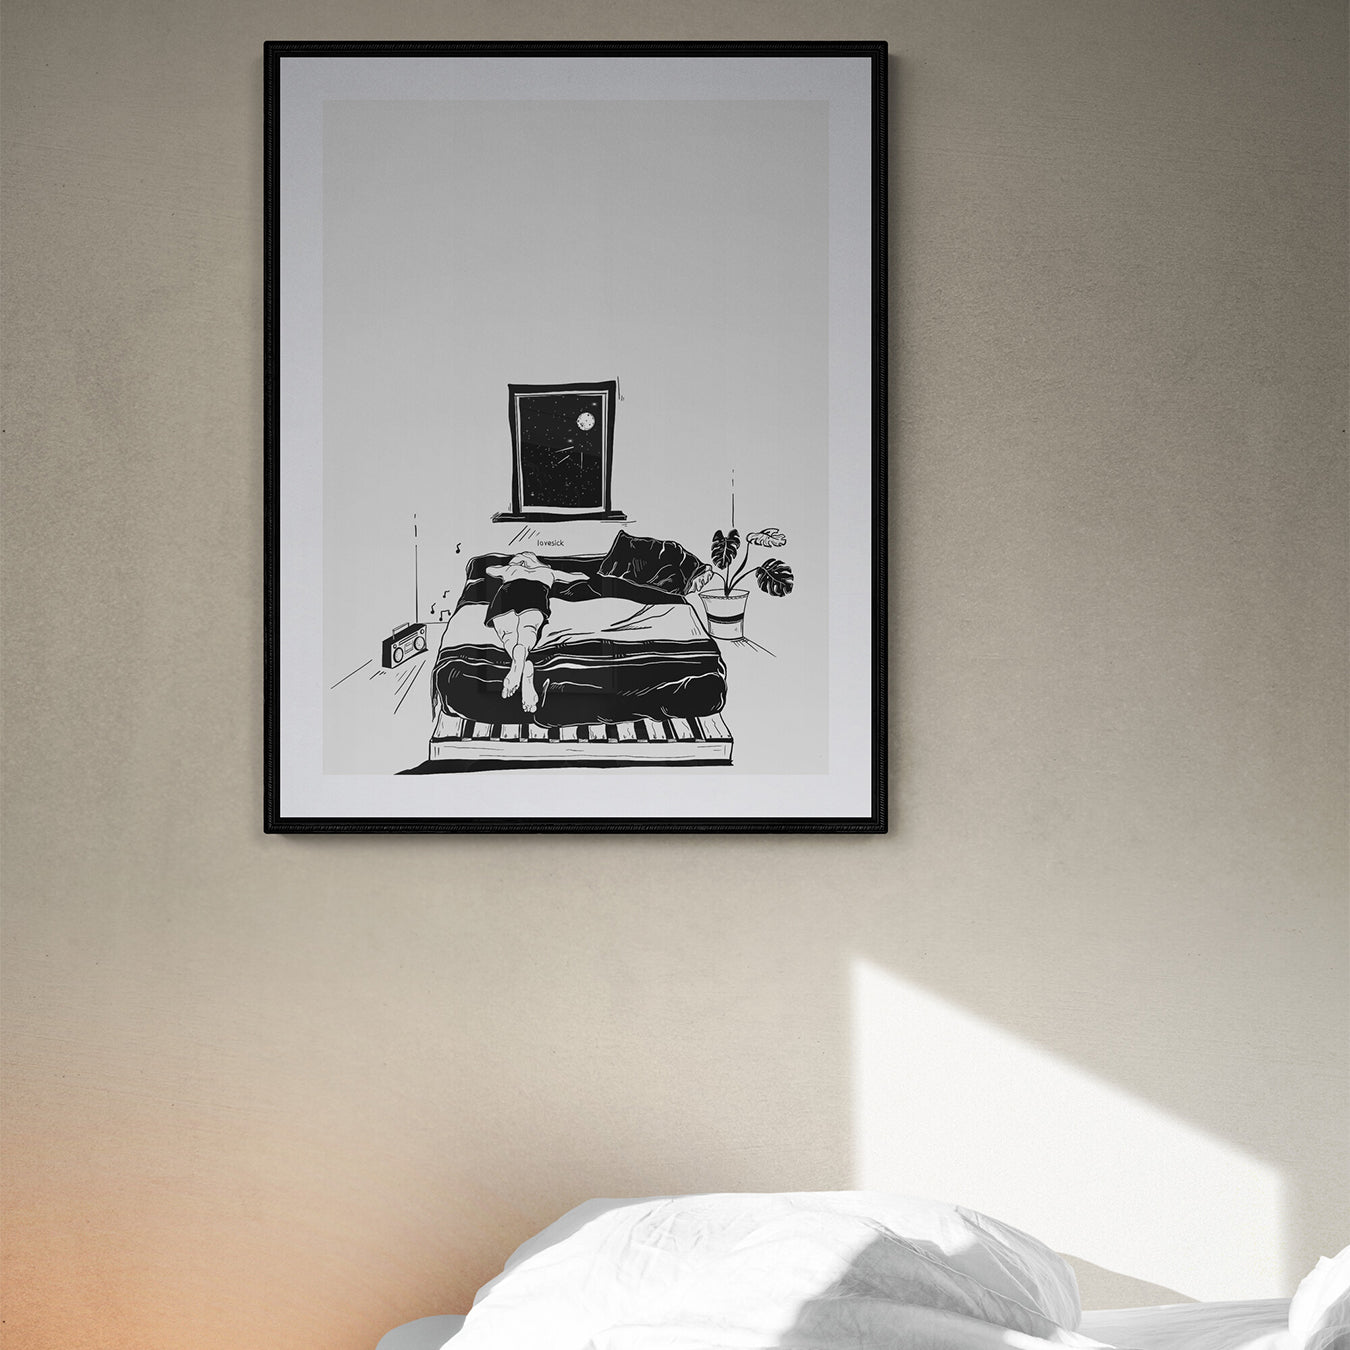 Courtney L Ellis Illustrations Art print by LGBTQ+ Illustration Artist Courtney Ellis. Wall art home decor and gifts. Lovesick girl lied in bed with music playing and moon out her window. soulful and meaningful artwork. Black and white line drawing. Plants. Home interior.